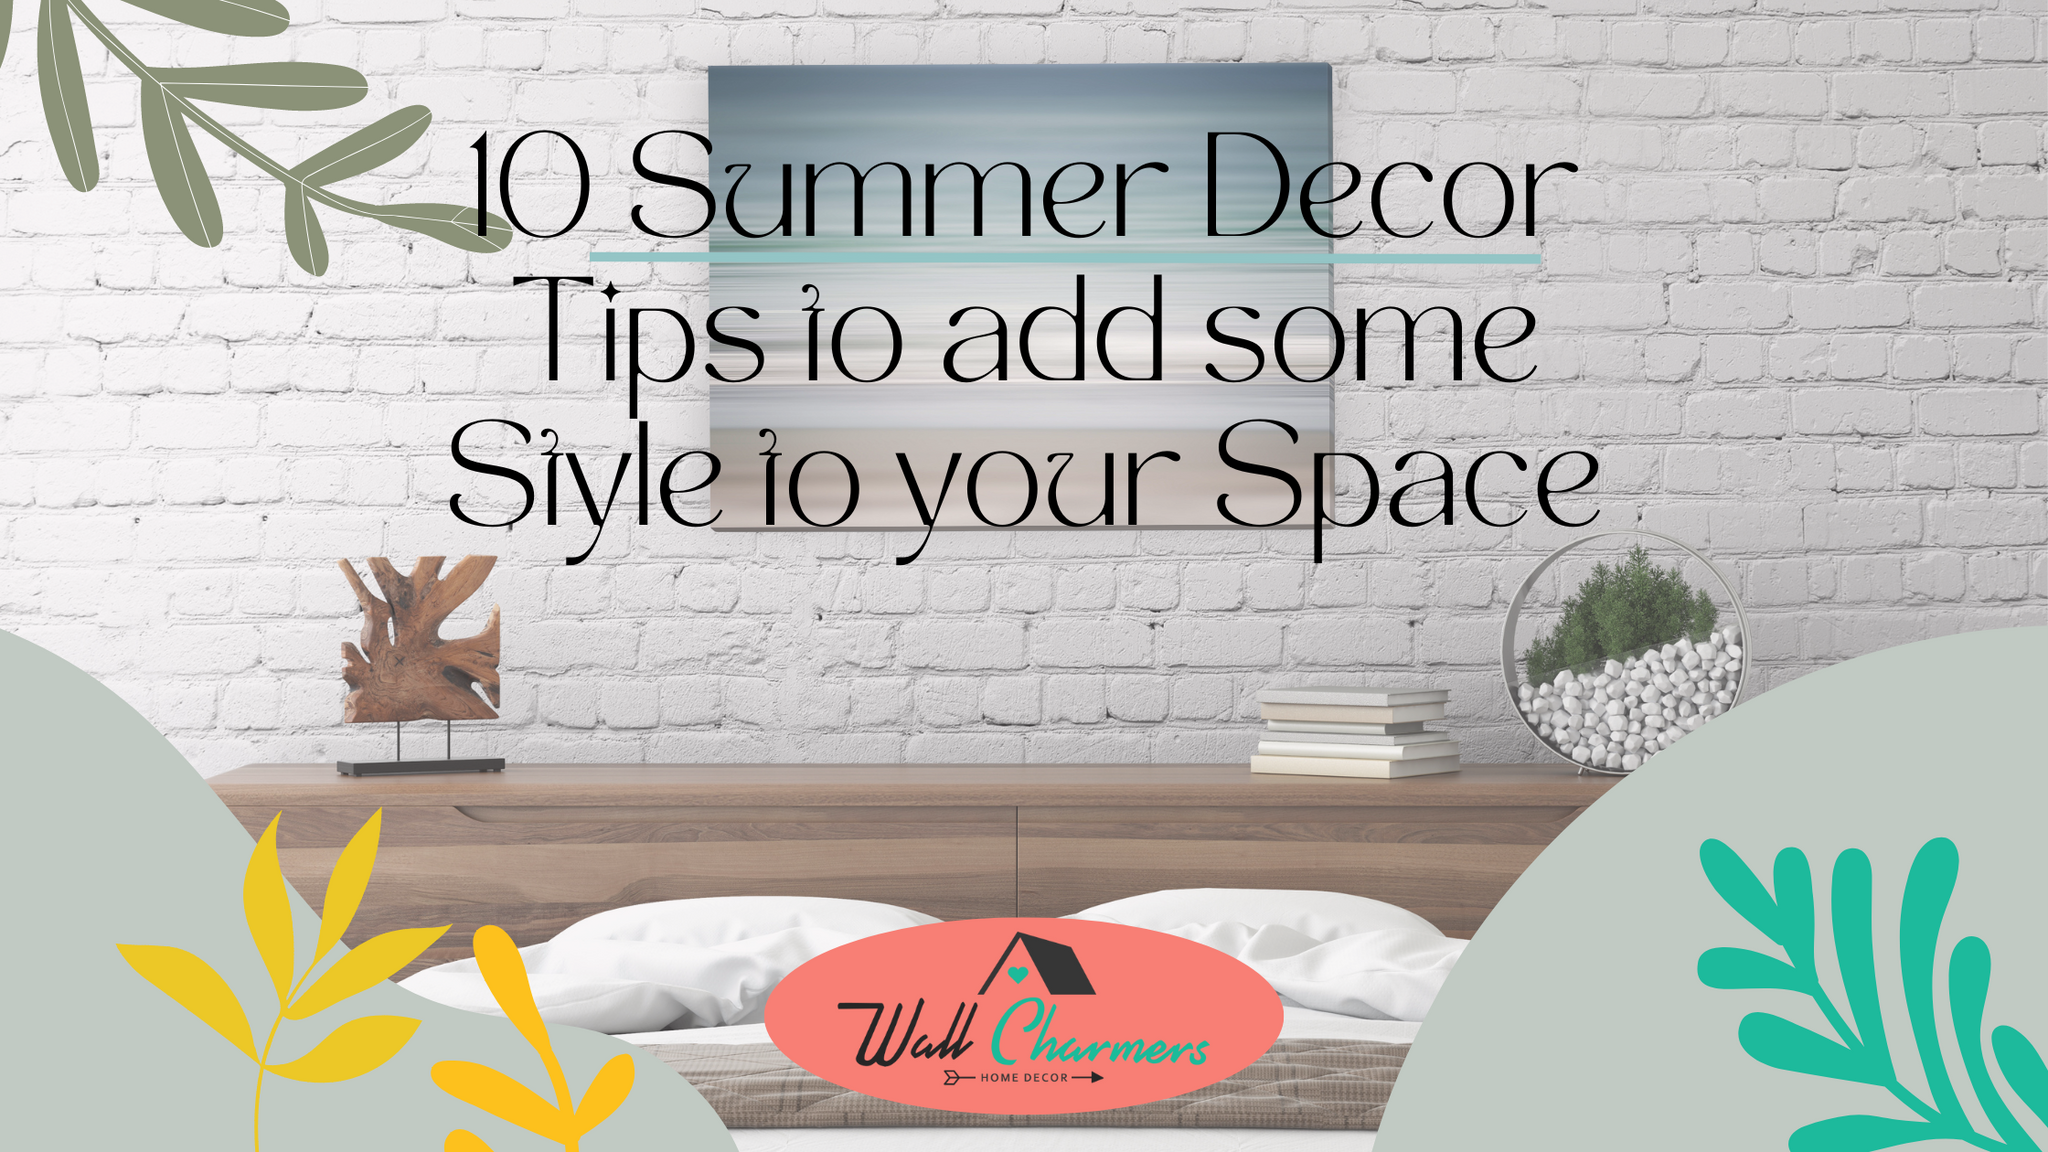 10 Summer Decor Tips to add some Style to your Space